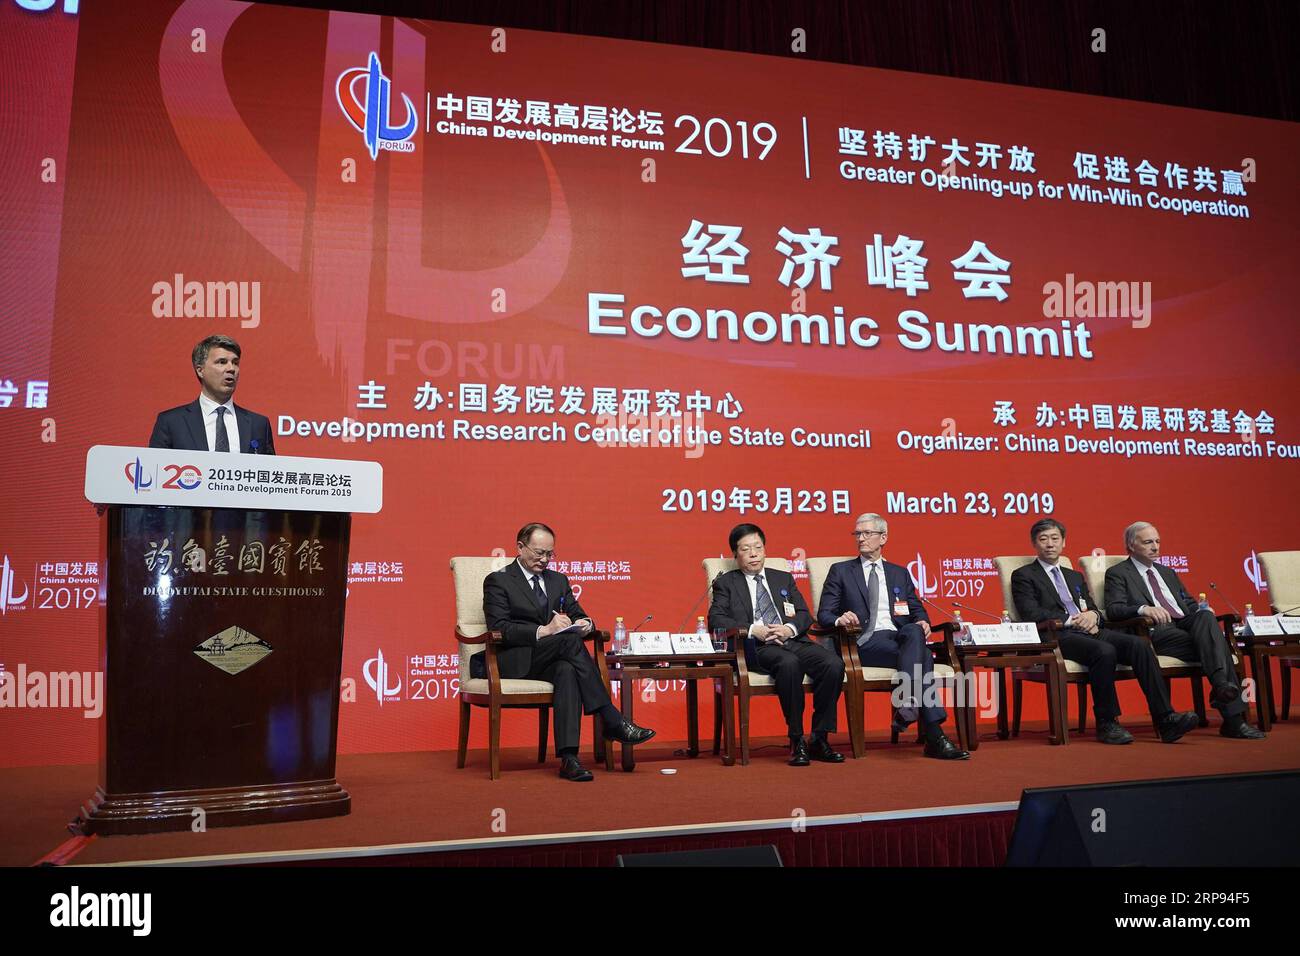 (190323) -- BEIJING, March 23, 2019 (Xinhua) -- Guests attend the Economic Summit of China Development Forum 2019 in Beijing, capital of China, March 23, 2019. The three-day China Development Forum, which kicked off Saturday, will focus on key issues such as the supply-side structural reform, new measures of proactive fiscal policy, and the opening-up of the financial sector and financial stability. More than 50 officials from the Chinese central government s departments and over 150 overseas delegates will participate in the forum, including 96 executives from the world s leading companies an Stock Photo